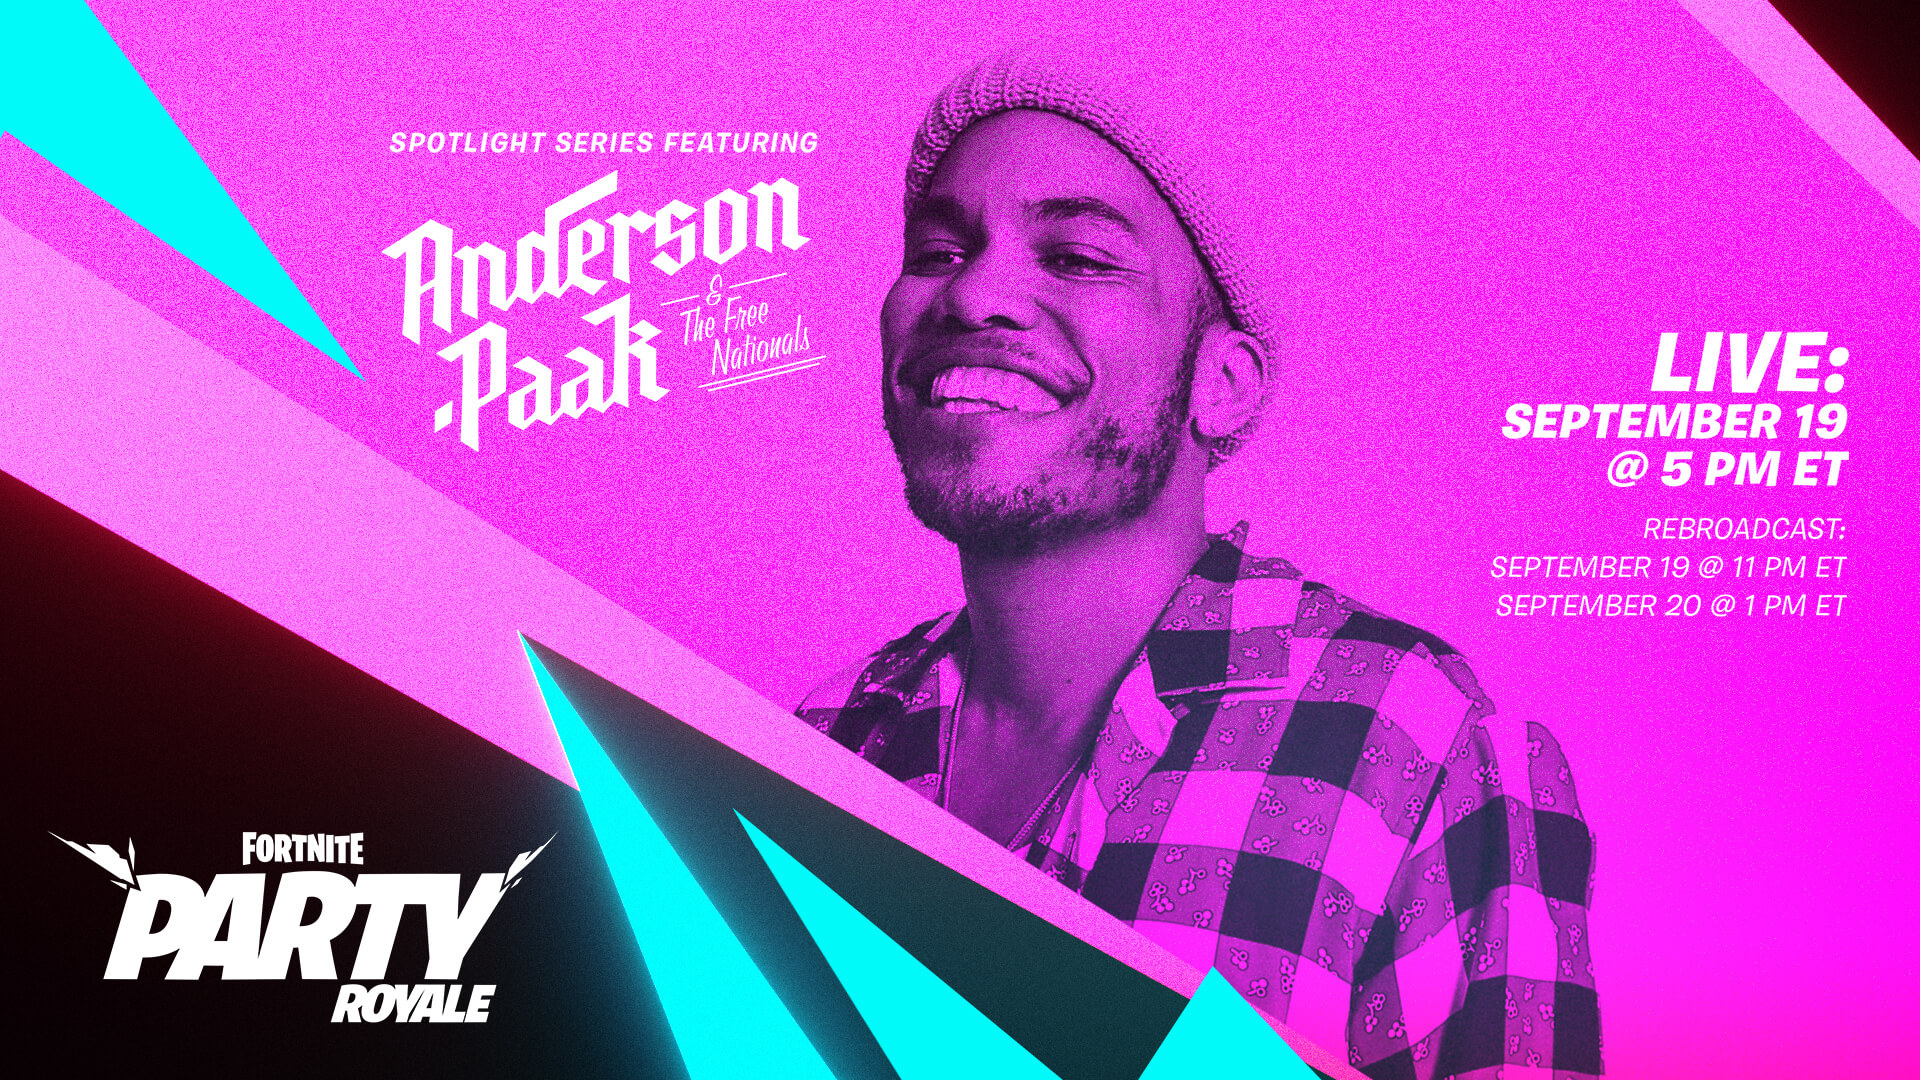 anderson-paak-fortnite-party-royale-spotlight-1920x1080-004870817